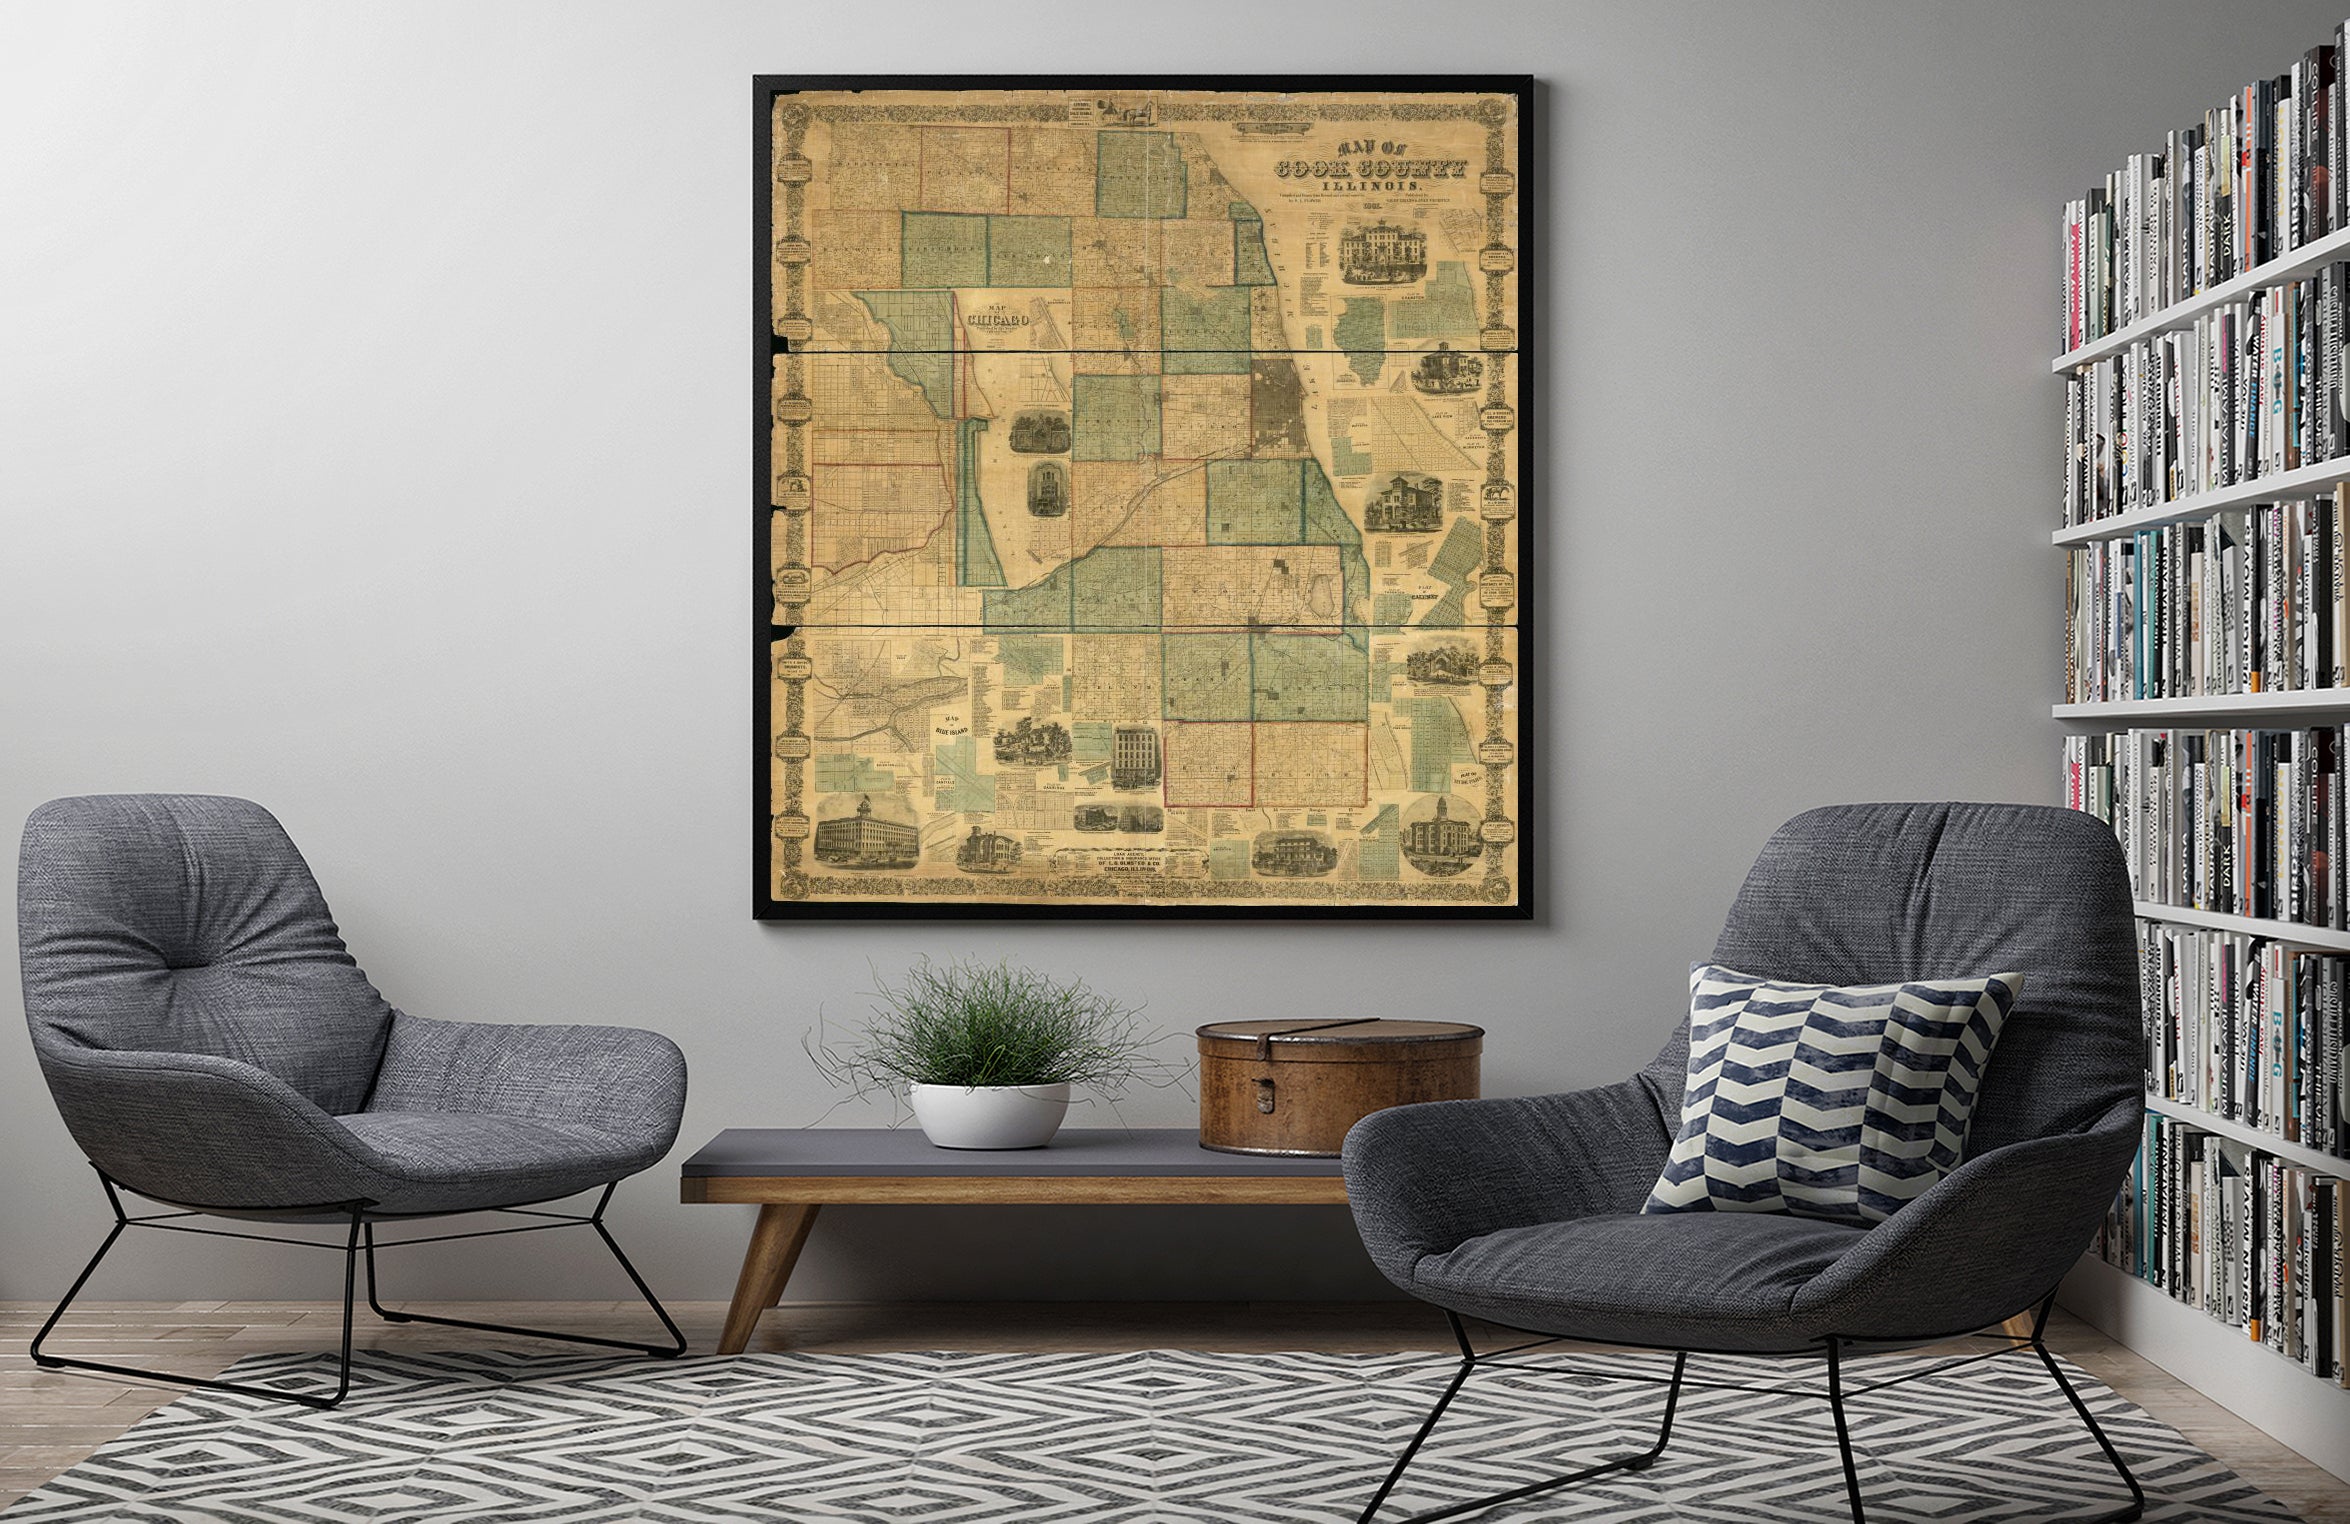 Summary: "Engraved, printed, colored, and mounted by Edw. Mendel." Land ownership map, 104 Includes business directories, list of Post Offices in the Cook County, views of residential, public, and business views. Insets: Plat of Taylorsport - Plat of Eva